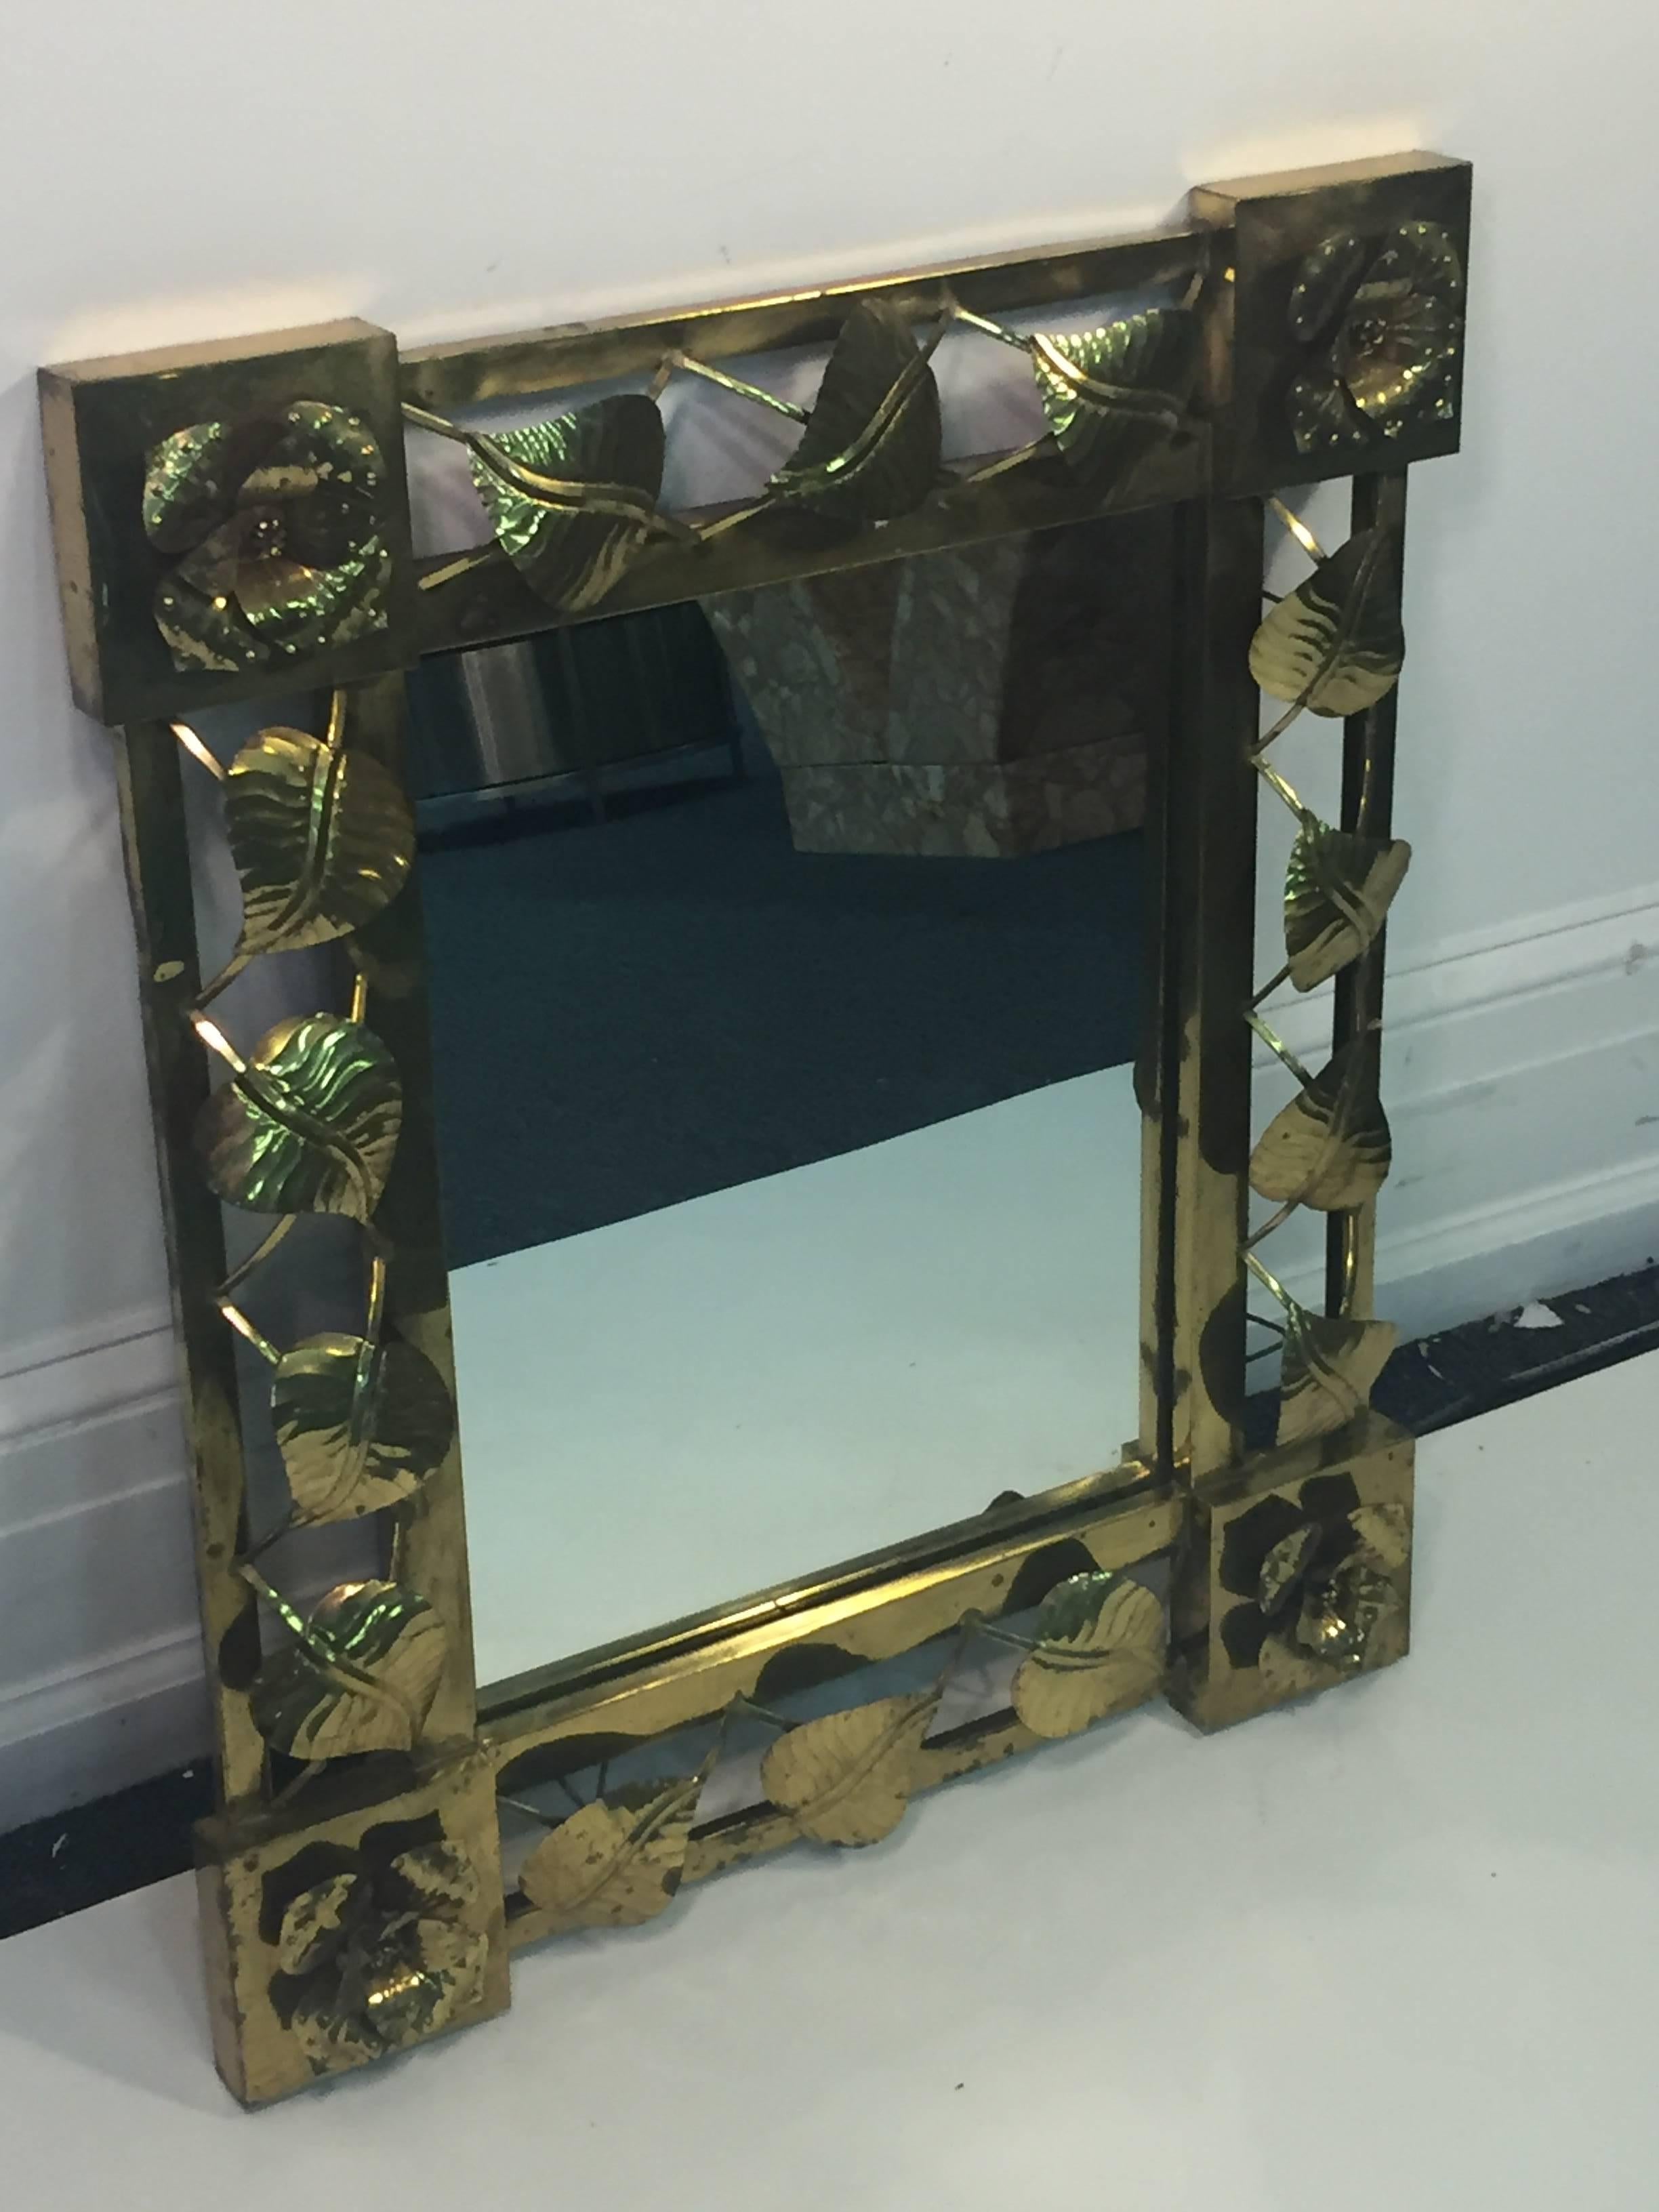 Modernist hand formed flower and leaf brass mirror in three dimensional form designed in Mexico in the 1970s.
Decorative and well constructed in form. Can be hung vertically or horizontally with hanging loops in back.